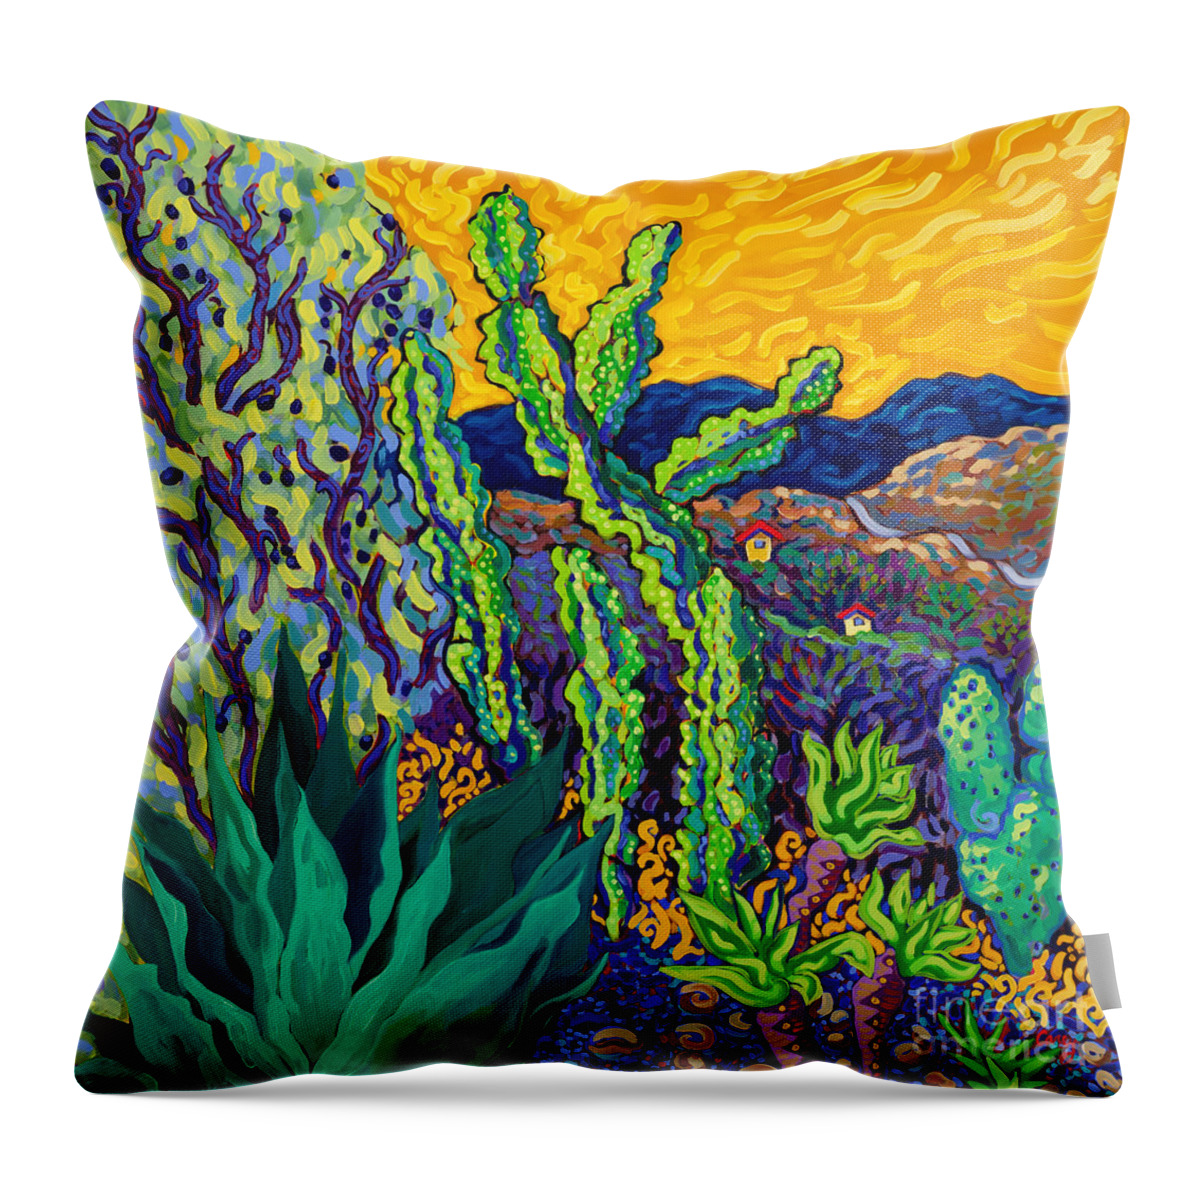 Desert Landscape Throw Pillow featuring the painting Runaway Day by Cathy Carey